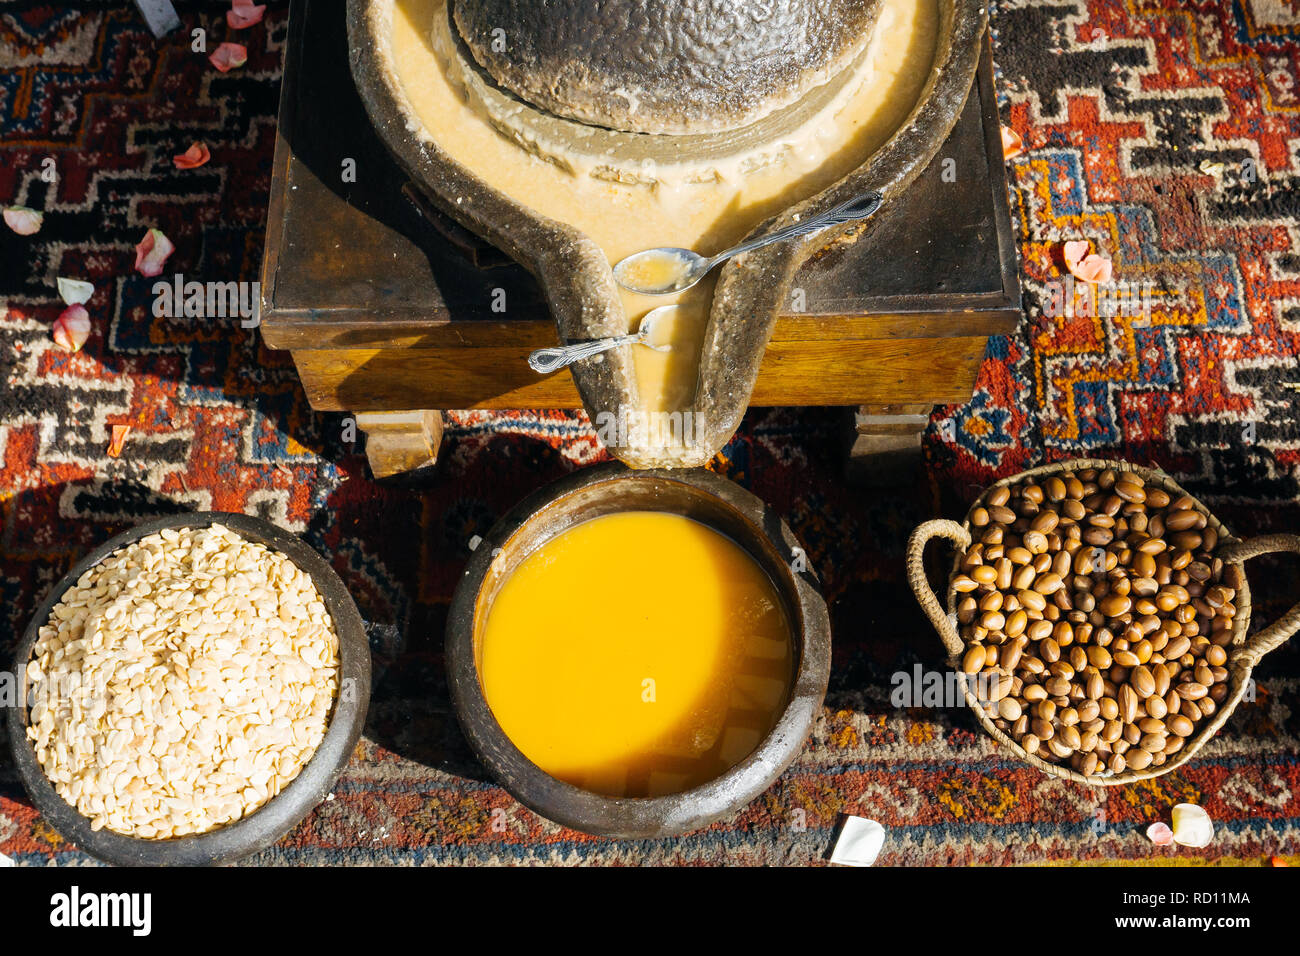 ARGAN OIL. Making of argan oil from argan nuts and seeds in Morocco.  Traditional method Stock Photo - Alamy